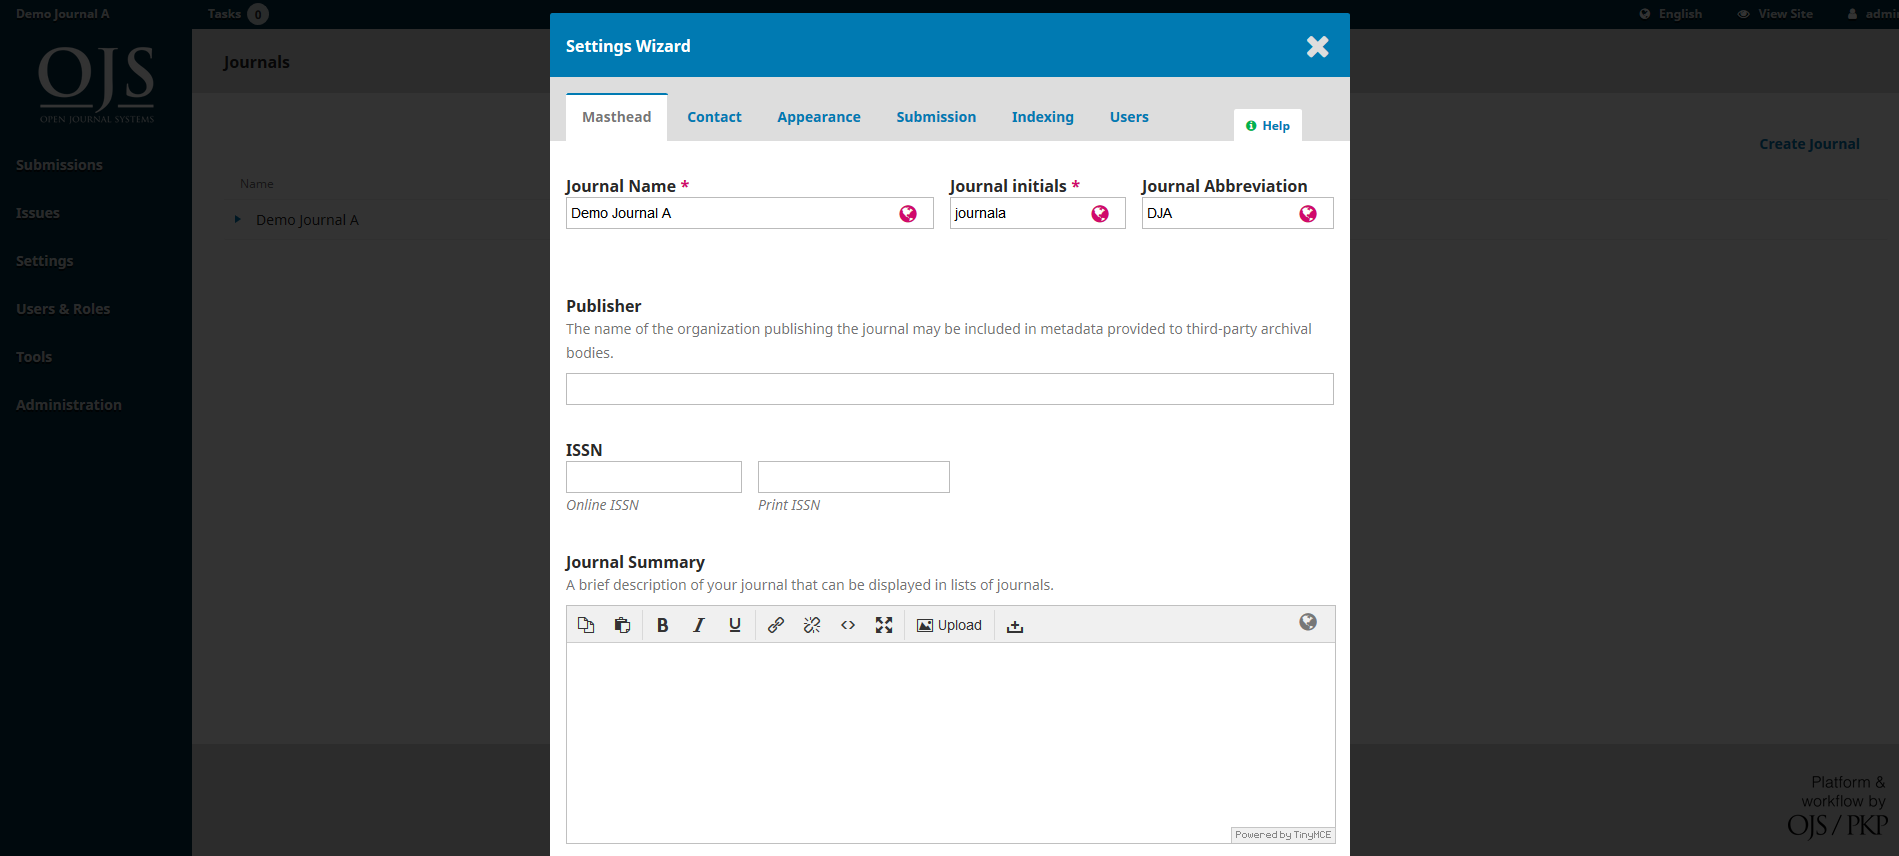 OJS 3.x hosted journal setting wizard